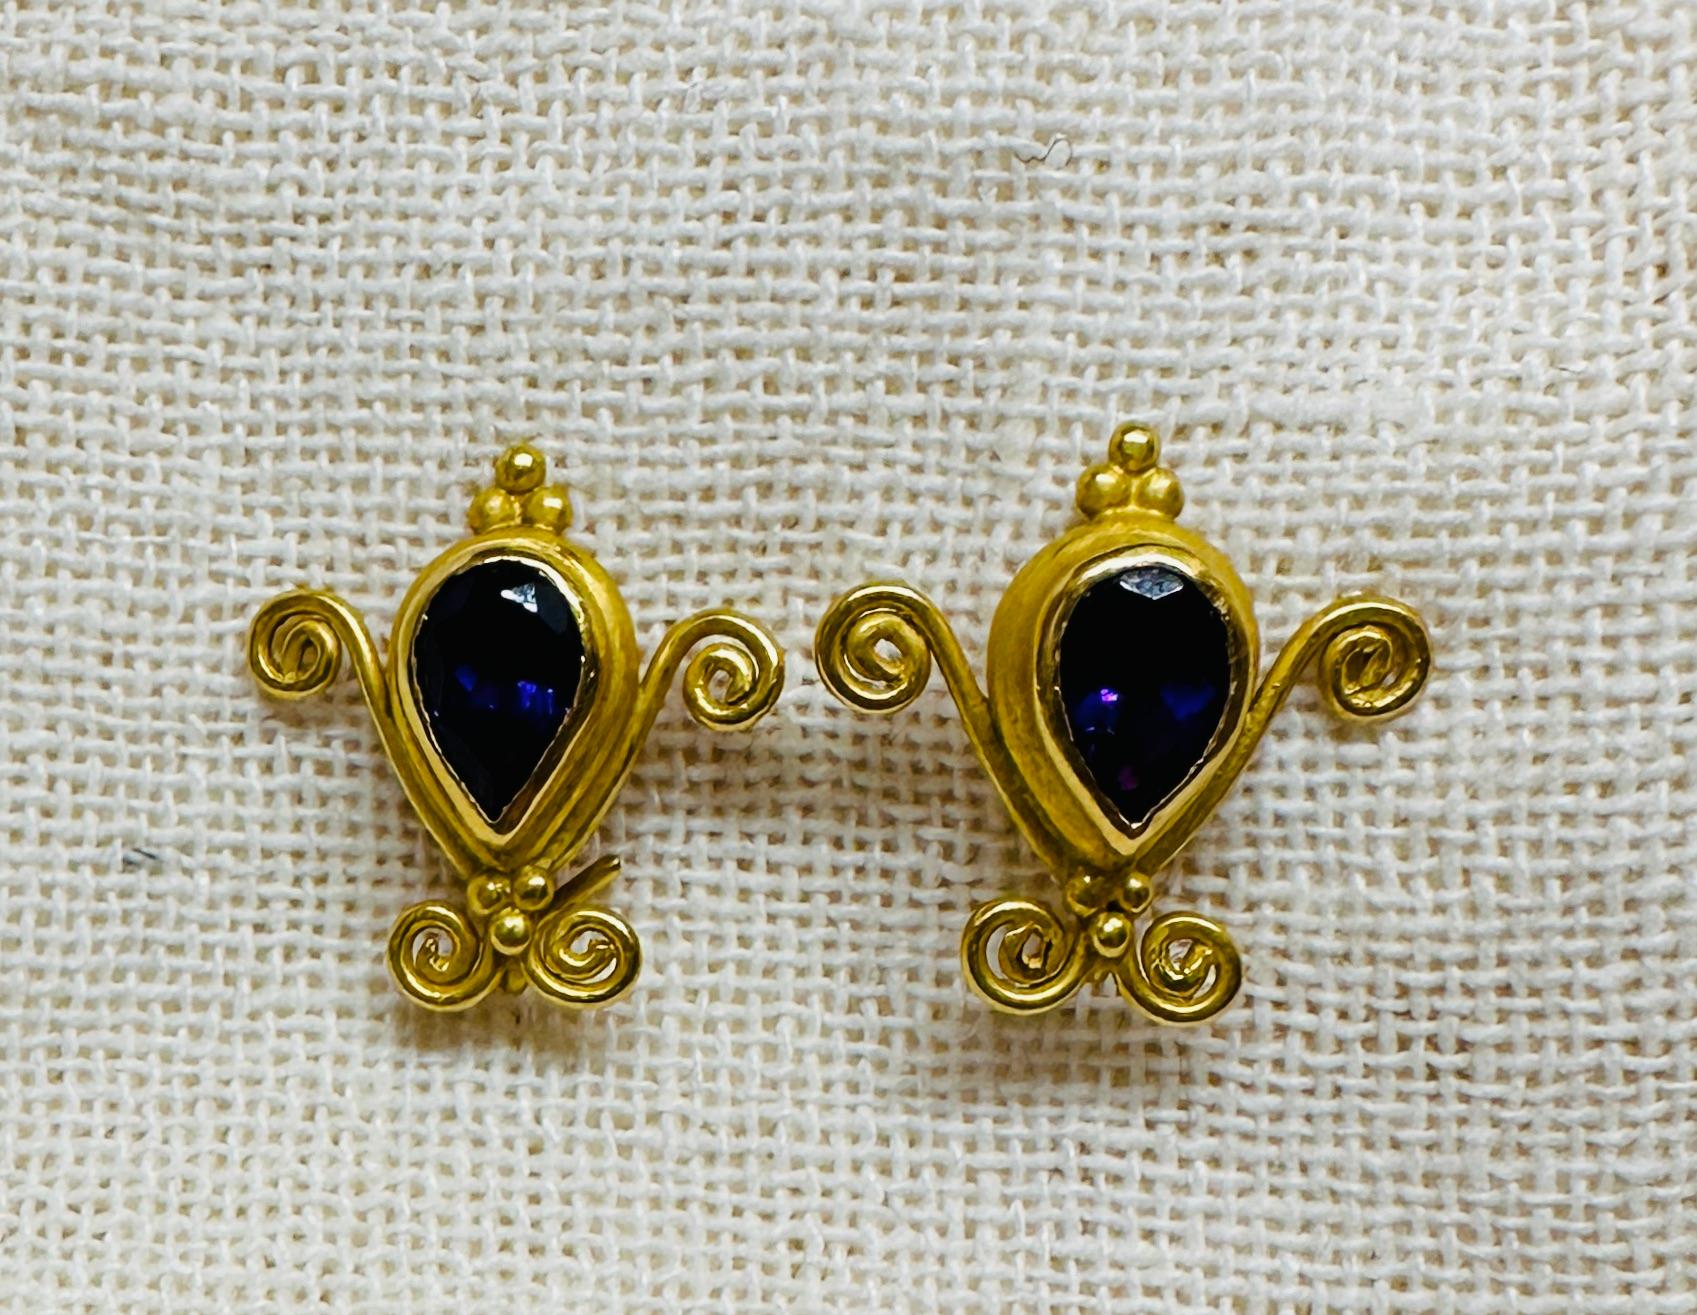 Spectacular earrings by Carolyn Tyler inspired by a Colonial Spanish design.

Hand made using both 22K and 18K recycled yellow gold, these earrings feature faceted briolette, pear shape and round cut amethysts. Adding to their versatility, the